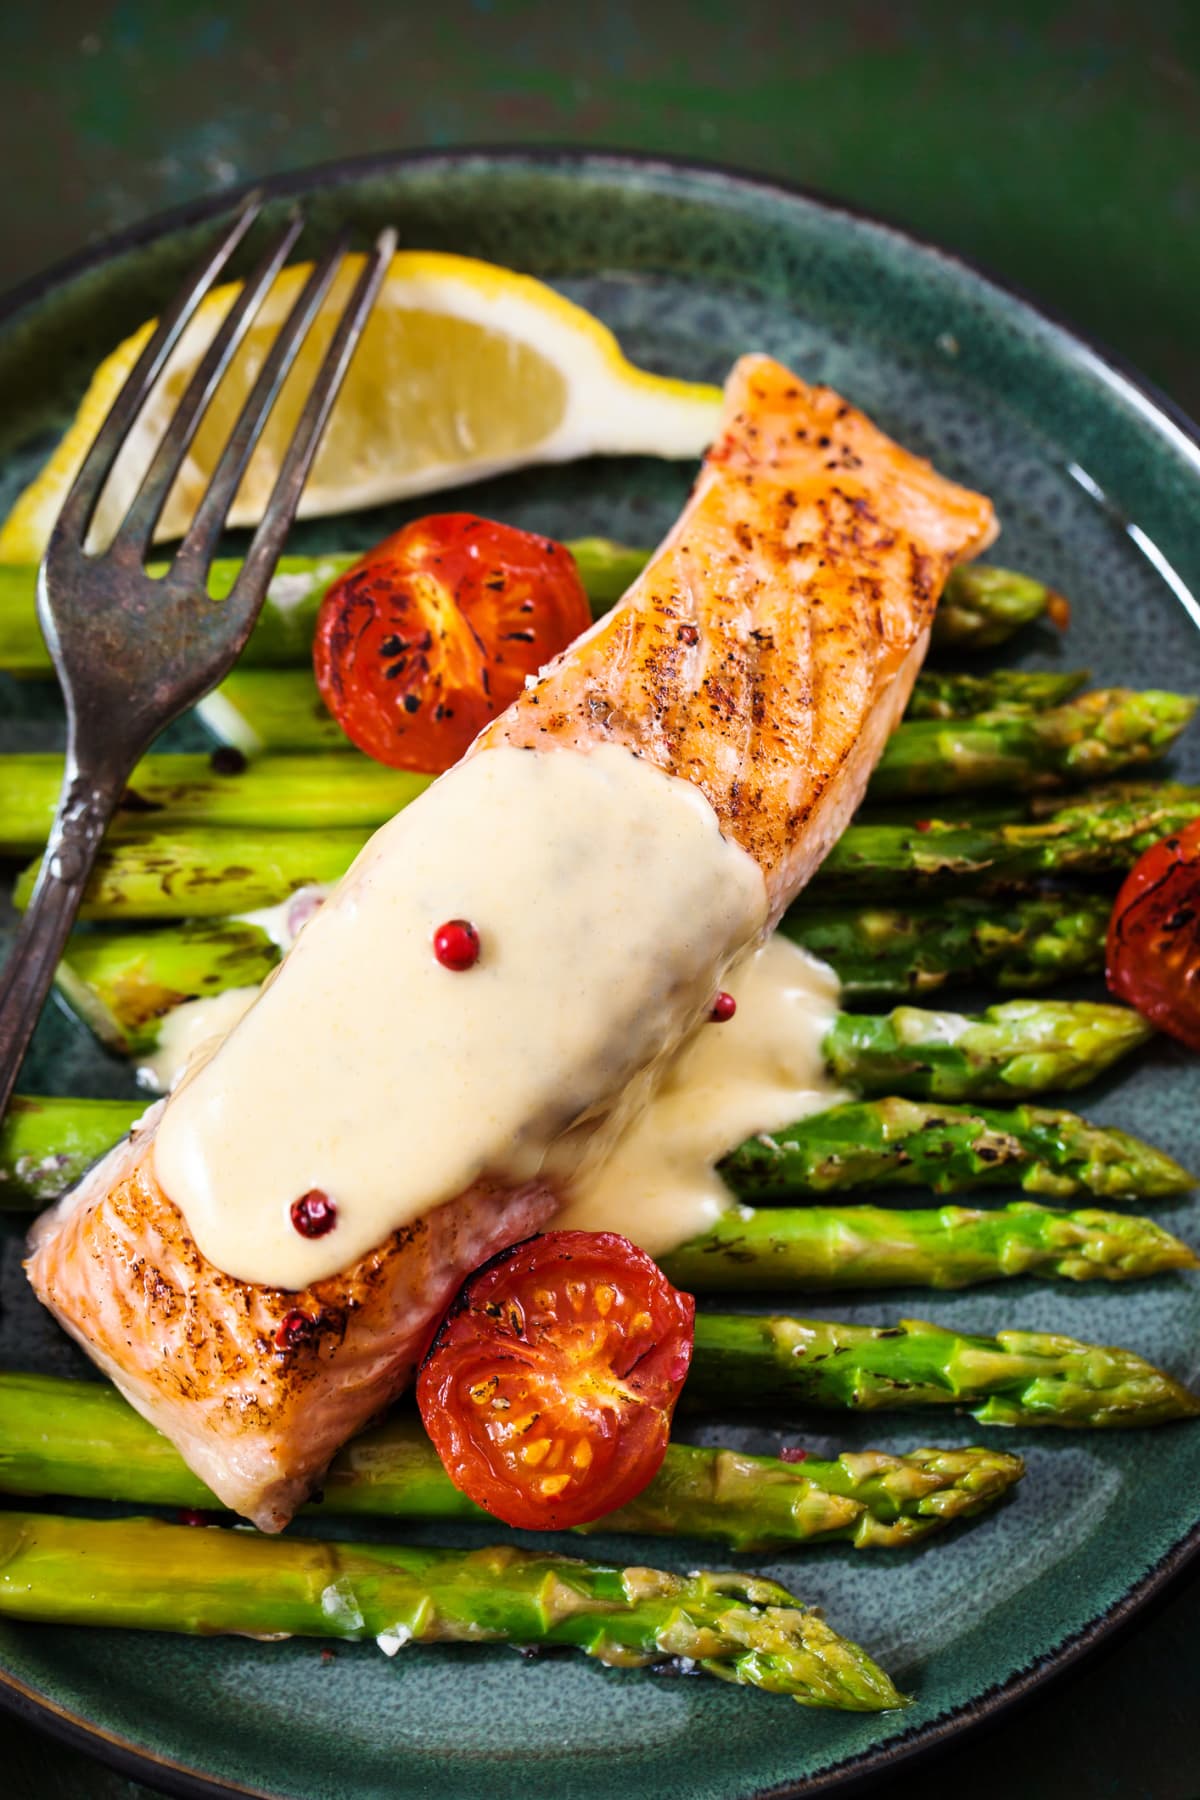 Salmon filet on asparagus with beurre blanc on top